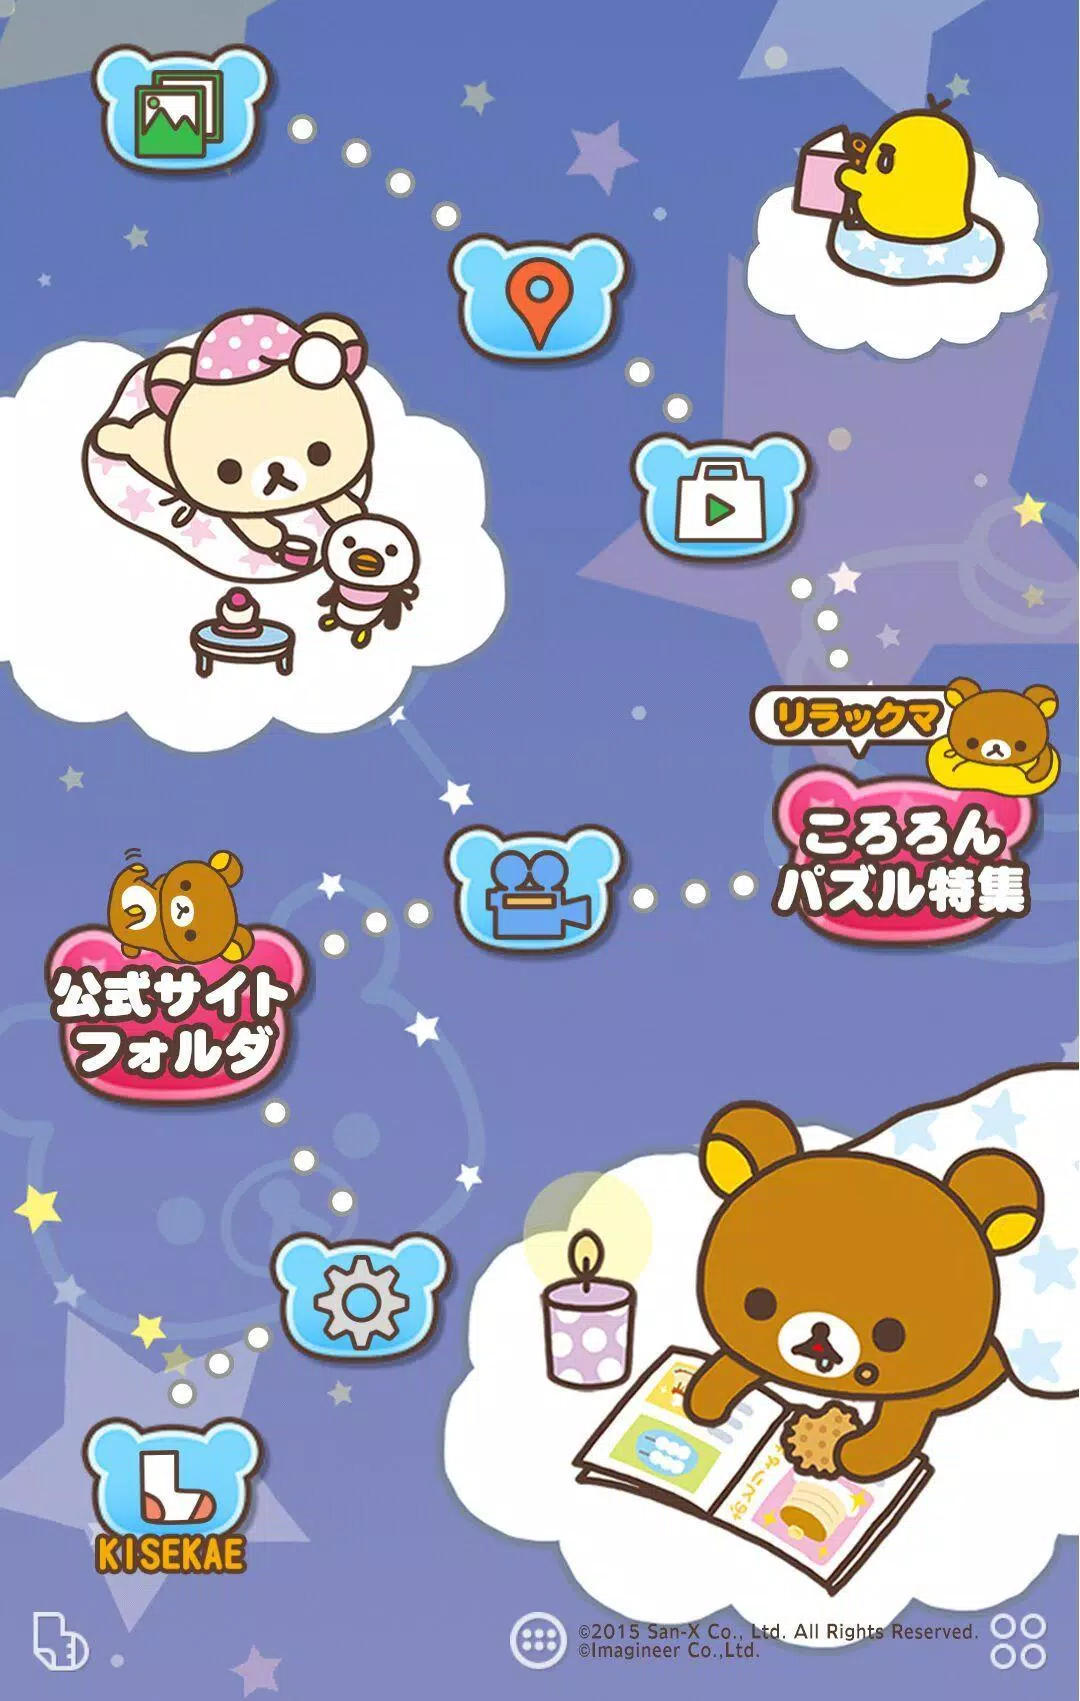 Download Do Apk De リラックマ 壁紙きせかえ Para Android